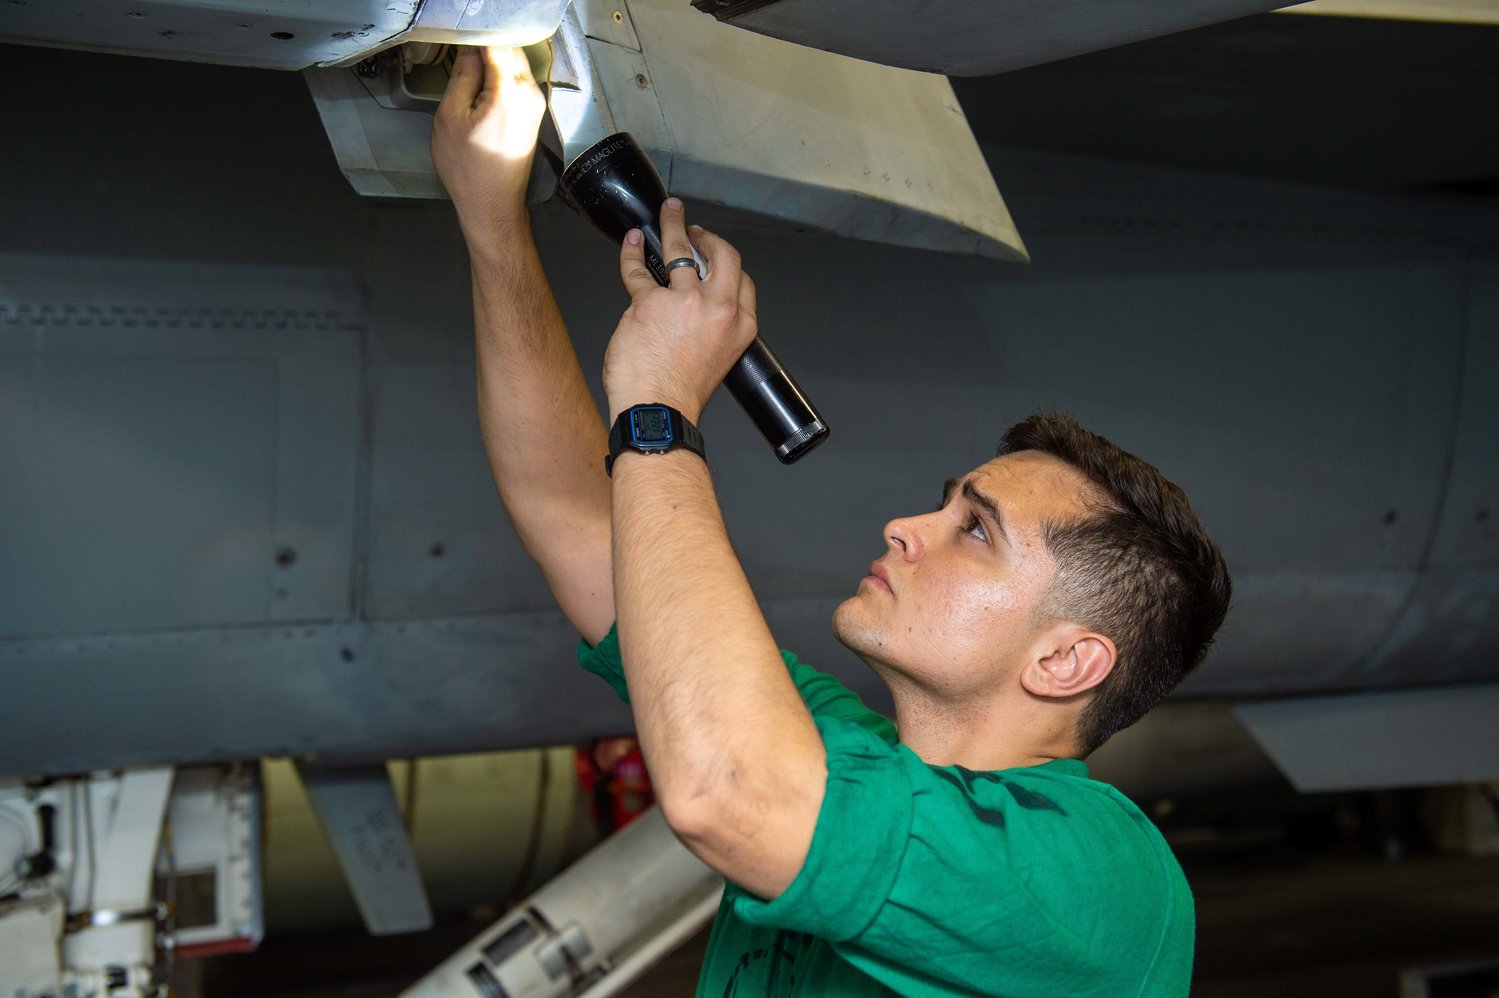 211204-N-TL932-1008 PHILIPPINE SEA (Dec. 4, 2021) Aviation Structural Mechanic 3rd Class Marcus Herrera, a native of Las Cruces, N.M., conducts maintenance on an EA-18G Growler assigned to the “Gauntlets” of Electronic Attack Squadron (VAQ) 136, in the hanger bay aboard Nimitz-class aircraft carrier USS Carl Vinson (CVN 70), Dec. 4, 2021. Carl Vinson Carrier Strike Group is on a scheduled deployment in the U.S. 7th Fleet area of operations to enhance interoperability through alliances and partnerships while serving as a ready-response force in support of a free and open Indo-Pacific region. (U.S. Navy photo by Mass Communication Specialist Seaman Apprentice Joshua Sapien)